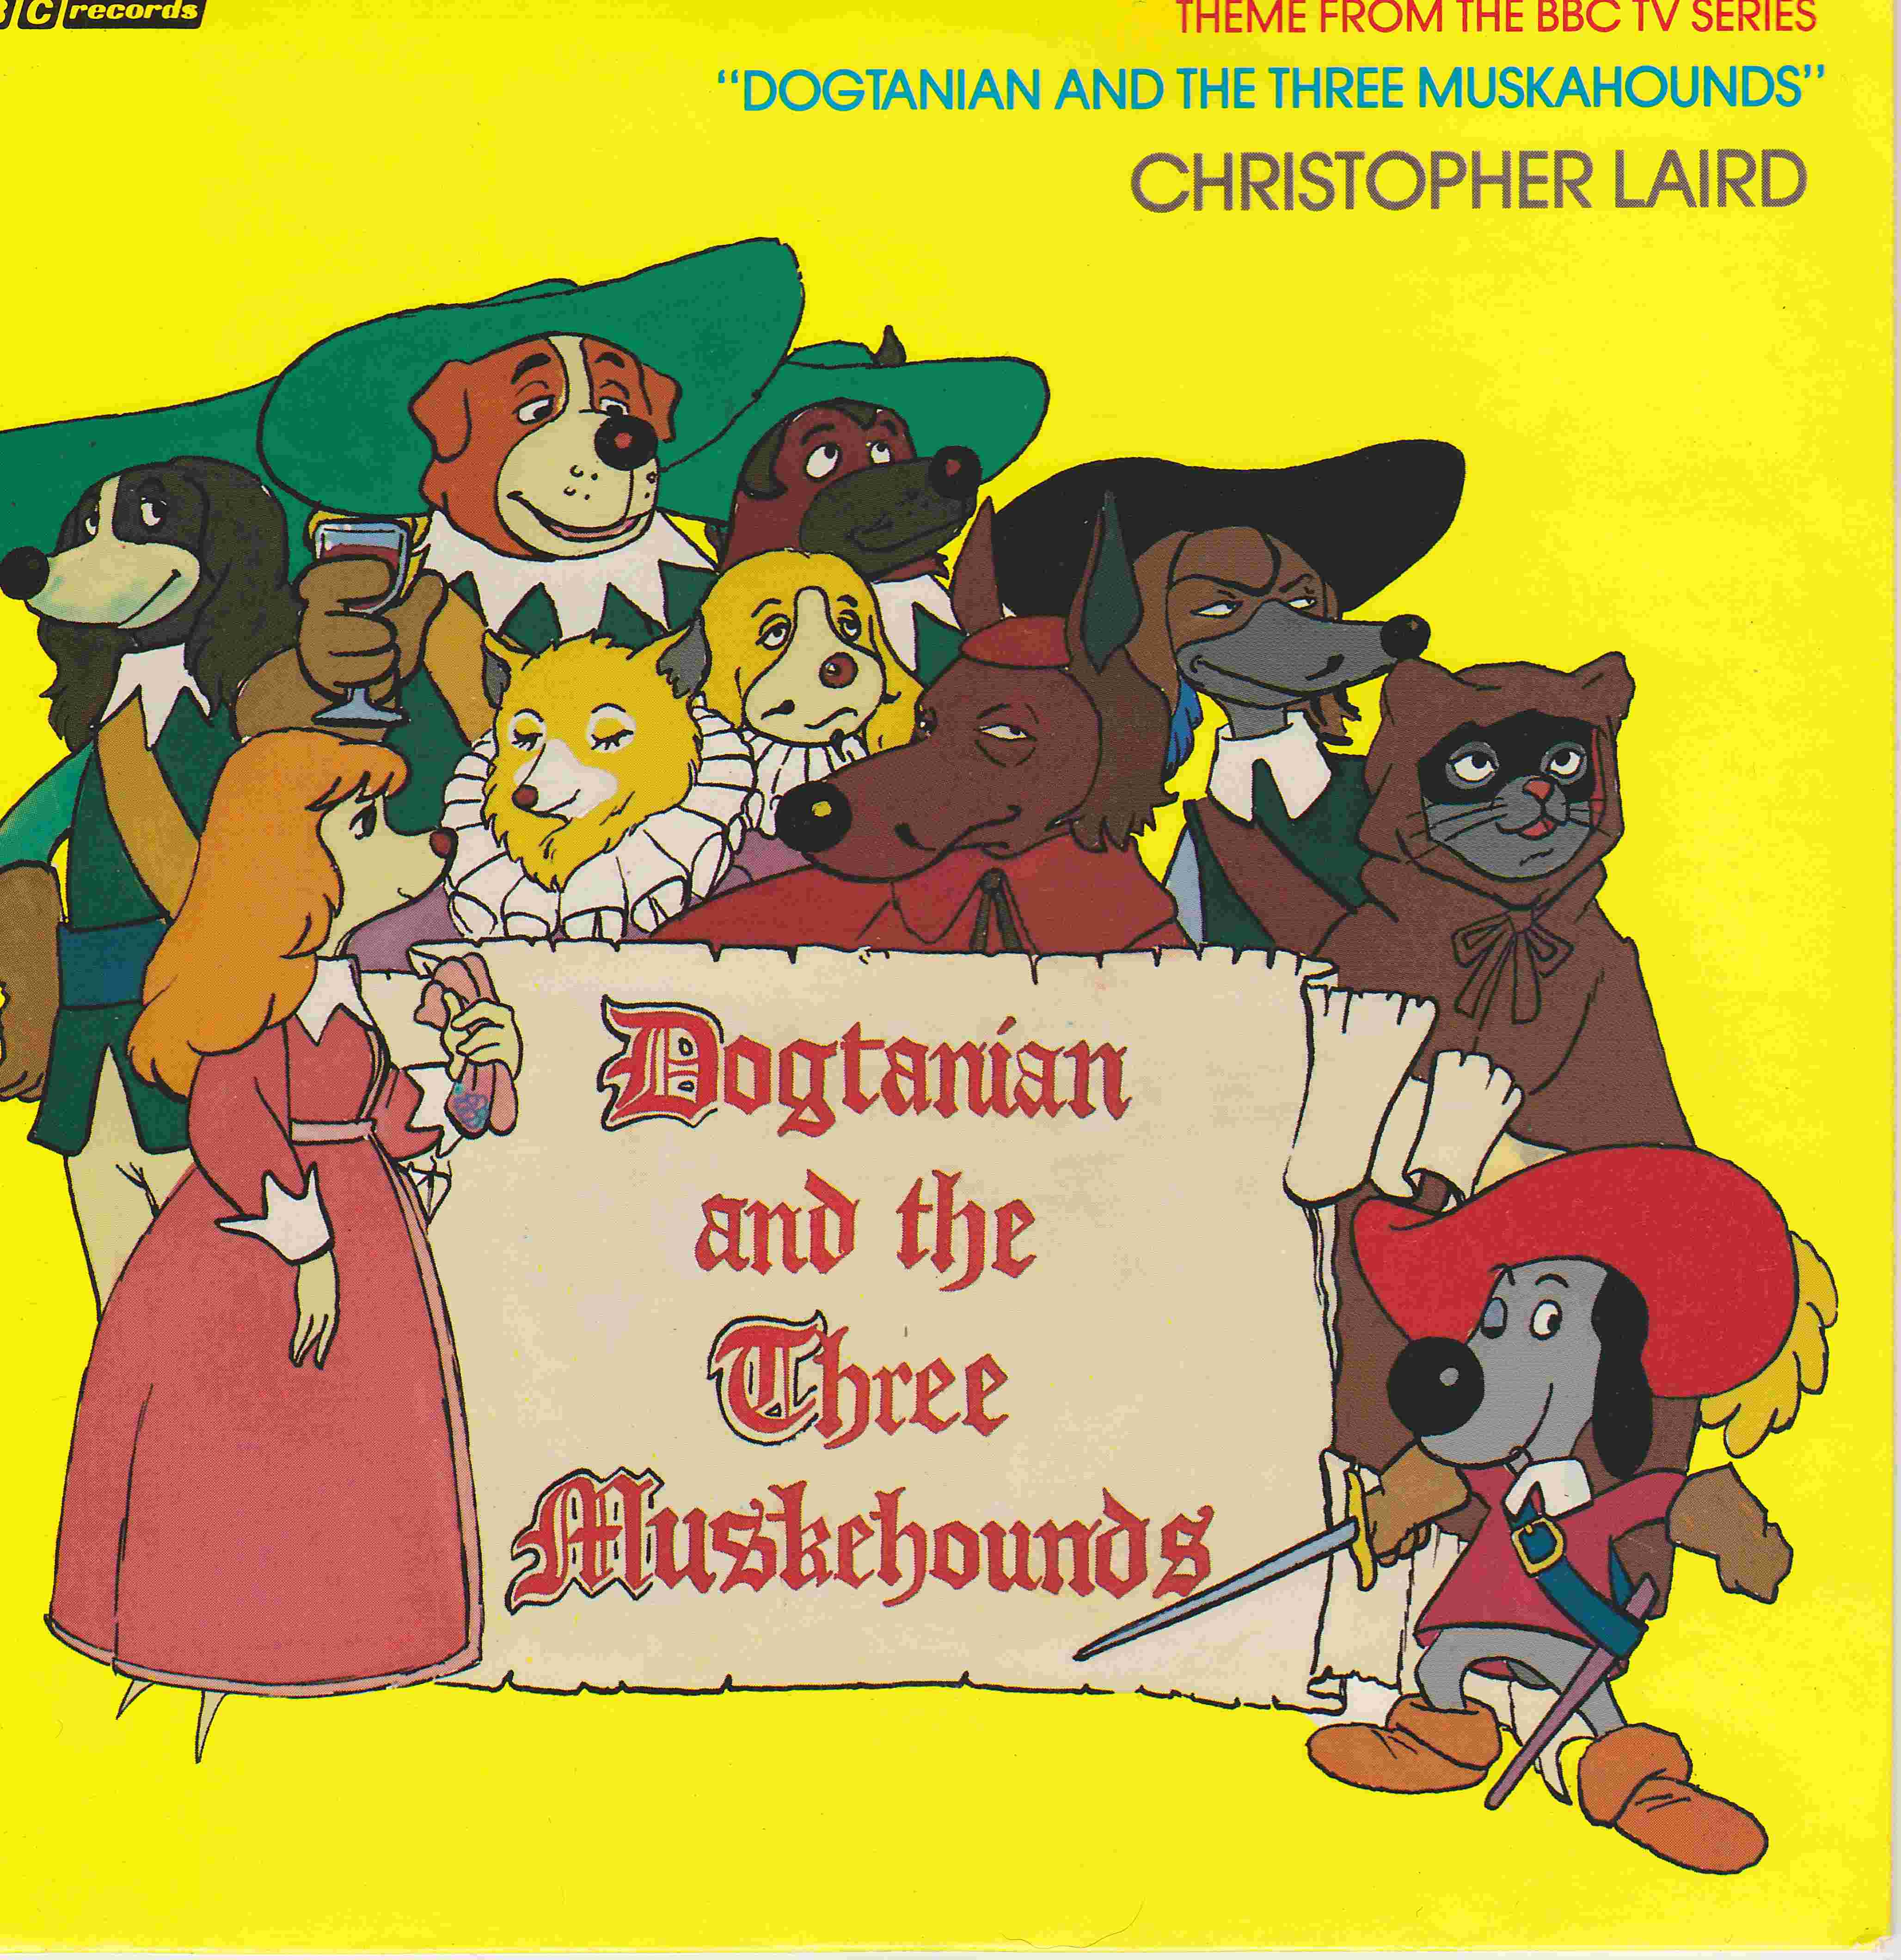 Picture of RESL 165 Dogtanian and the three muskehounds by artist Christopher Laird / G & M Orchestra from the BBC singles - Records and Tapes library